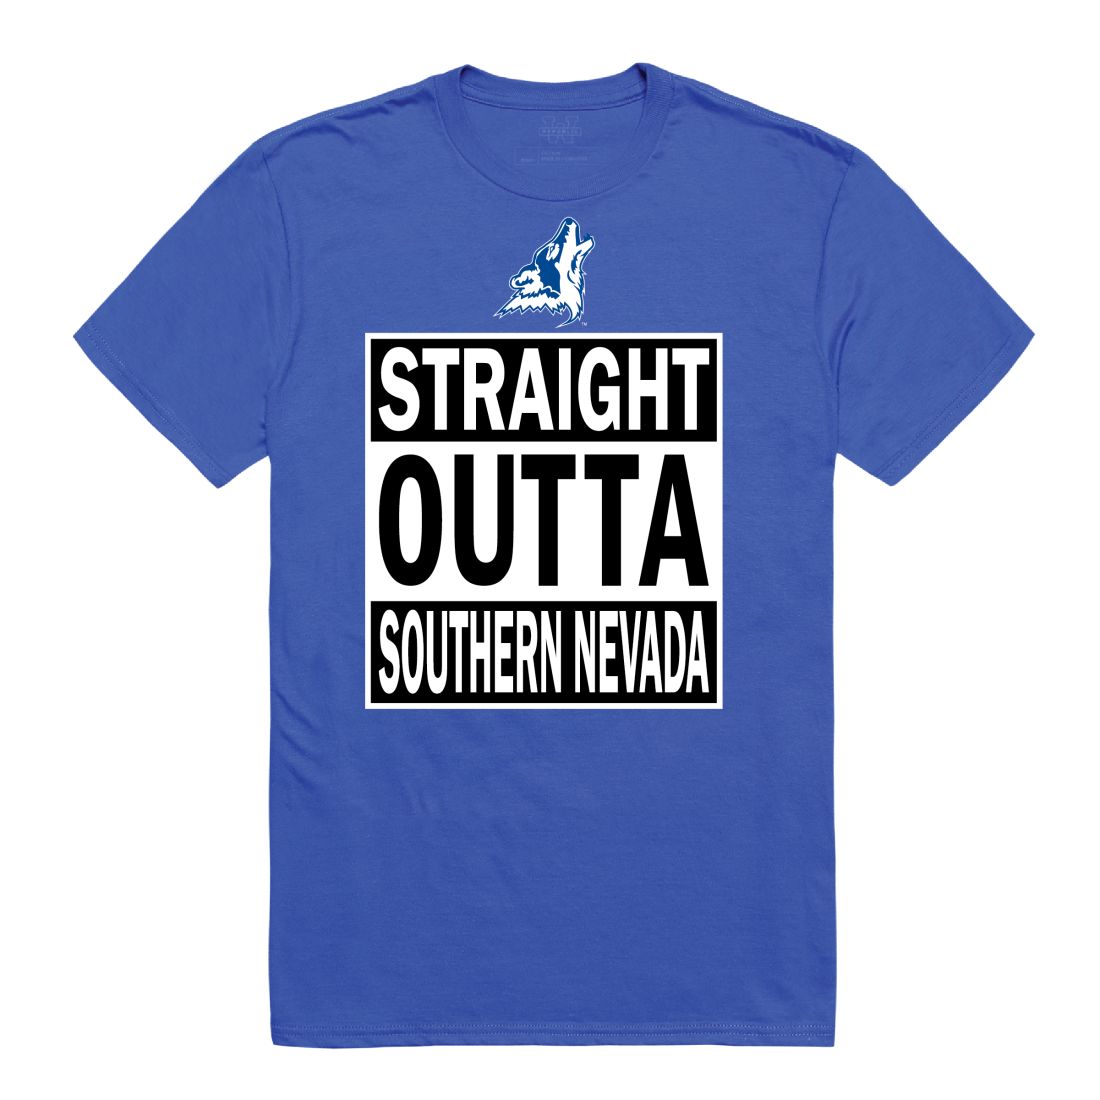 College of Southern Nevada Coyotes Straight Outta T-Shirt